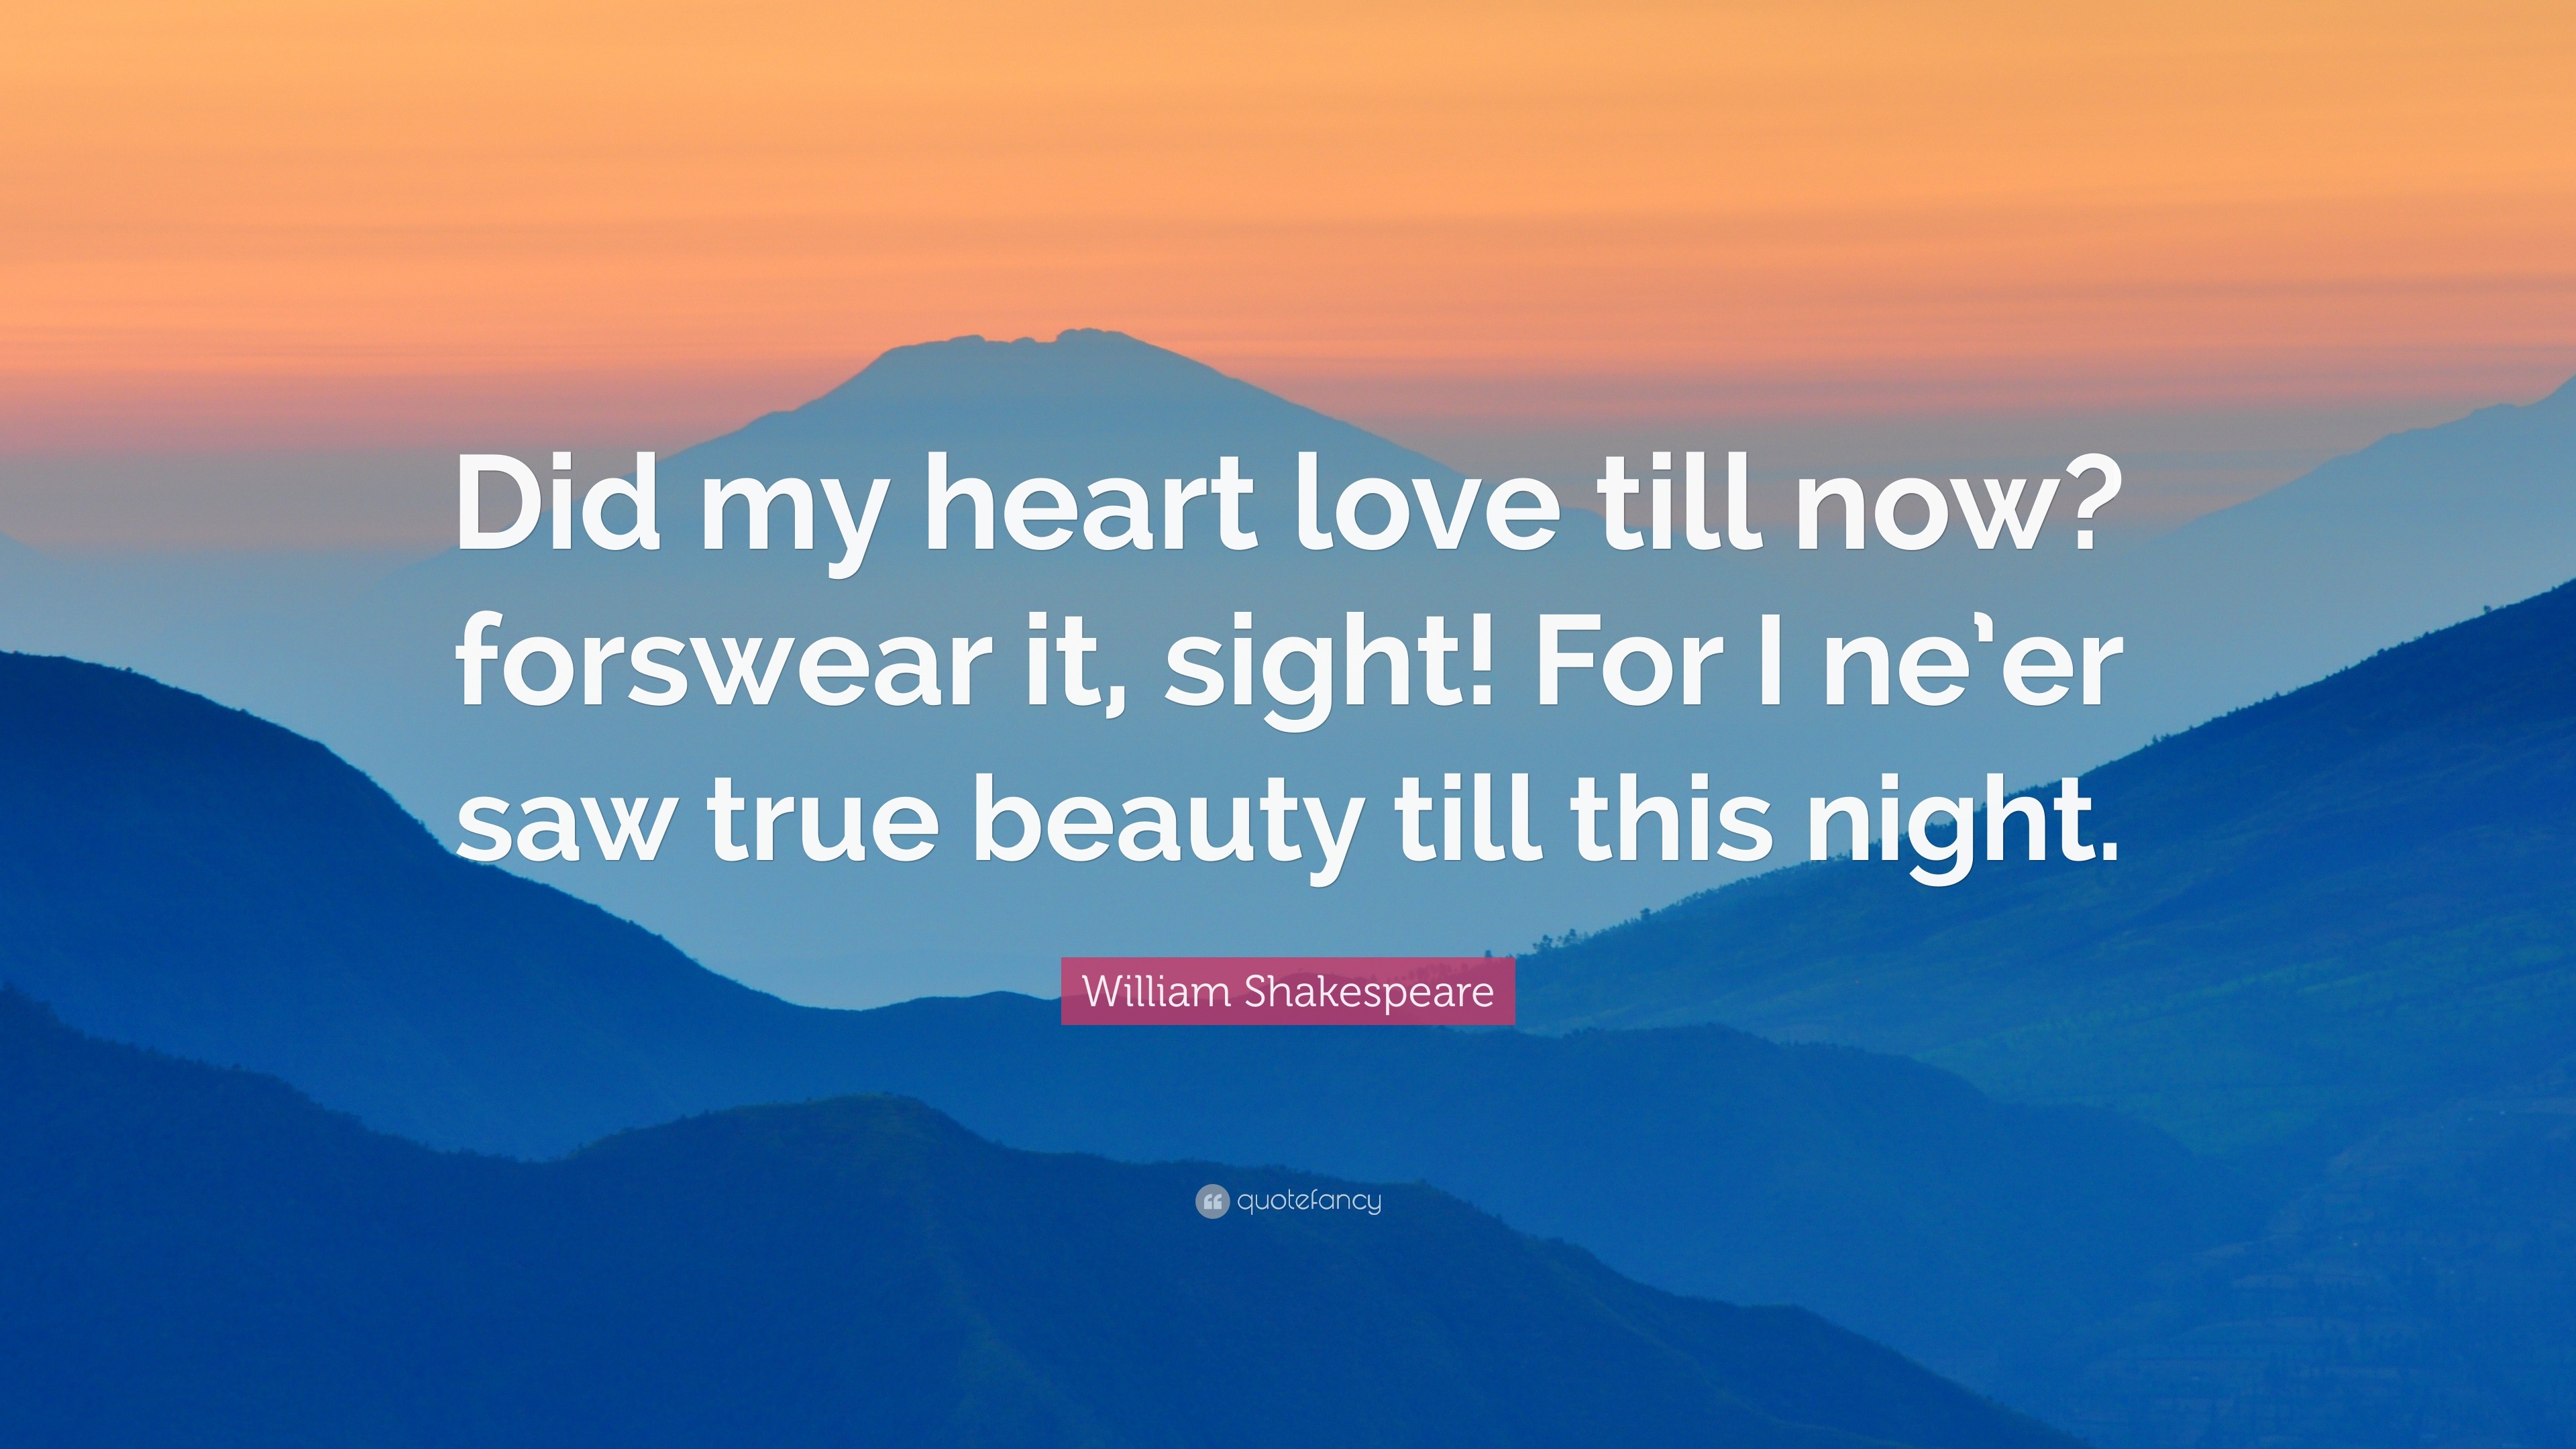 William Shakespeare Quote: “Did my heart love till now? forswear it